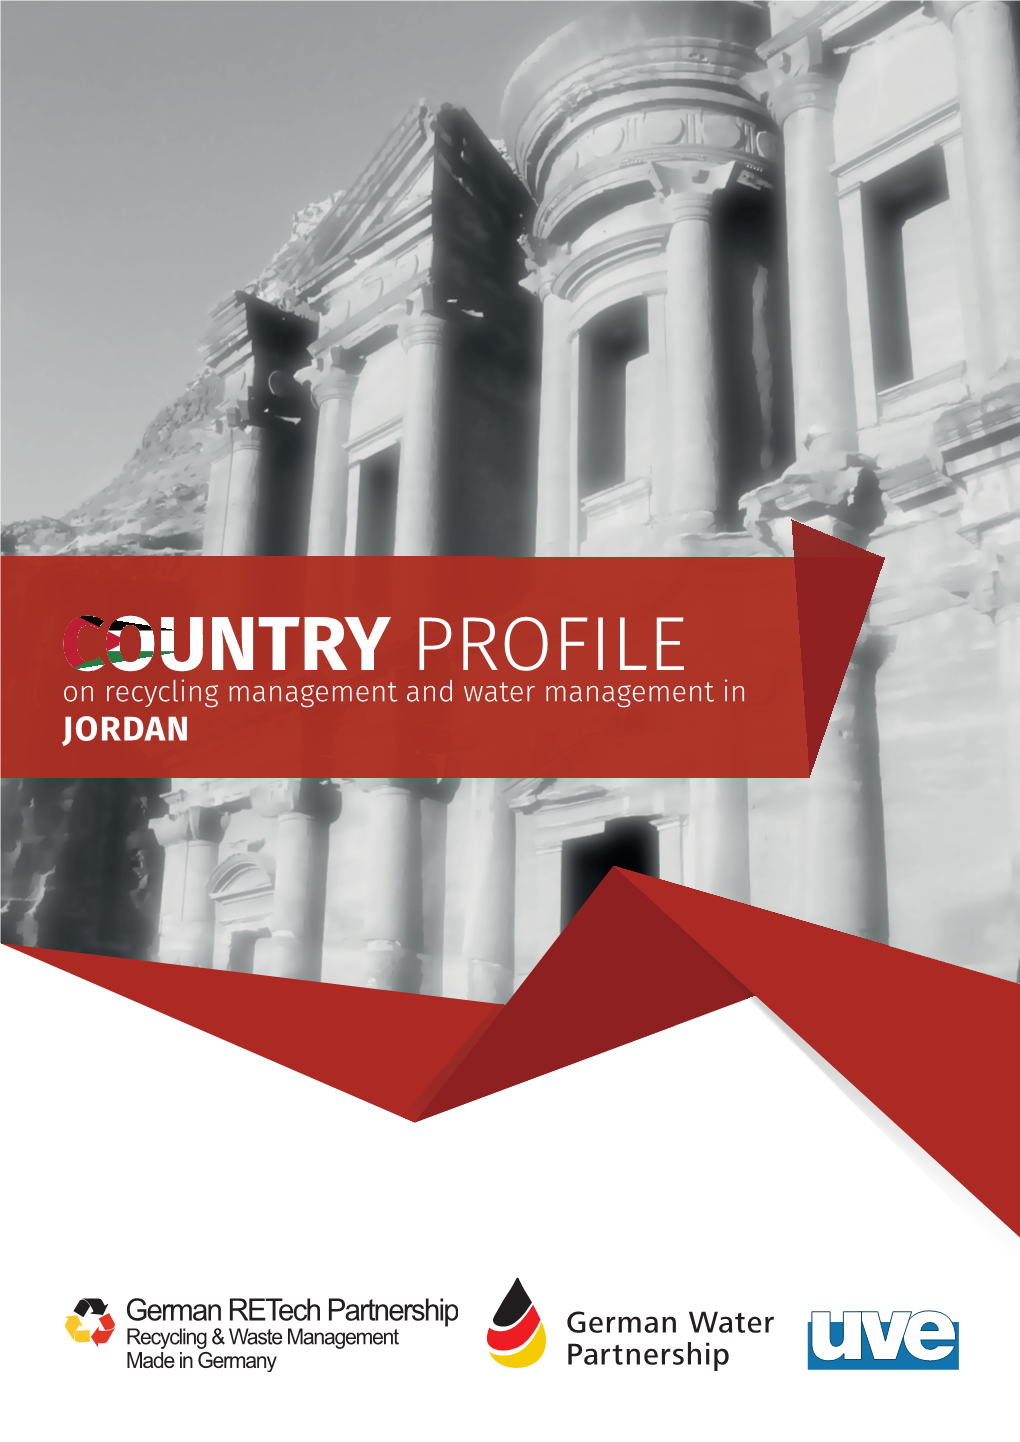 JORDAN COUNTRY PROFILE for Recycling and Water Management in JORDAN 2